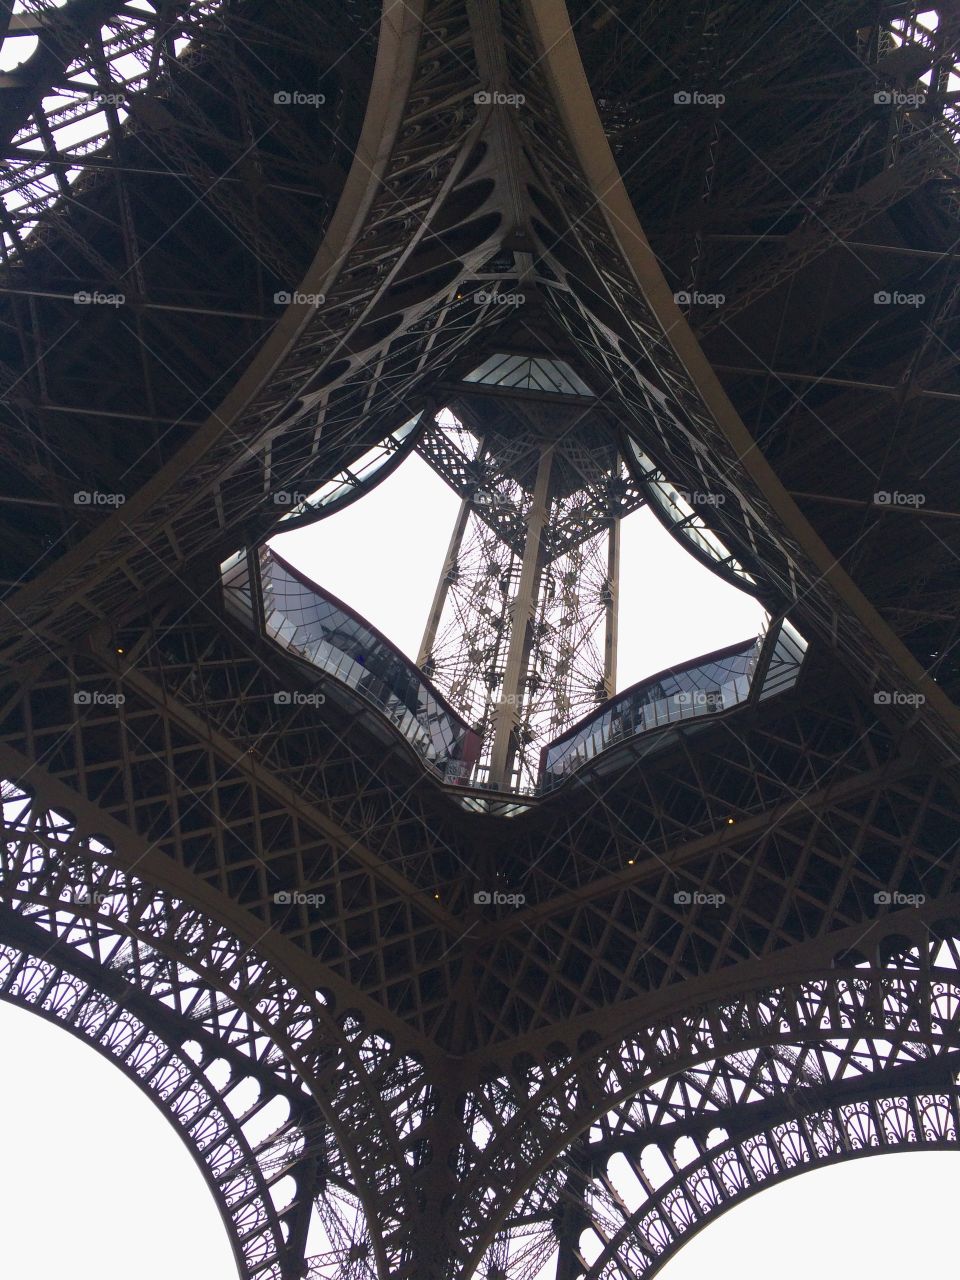 Different perspective of Eiffel Tower